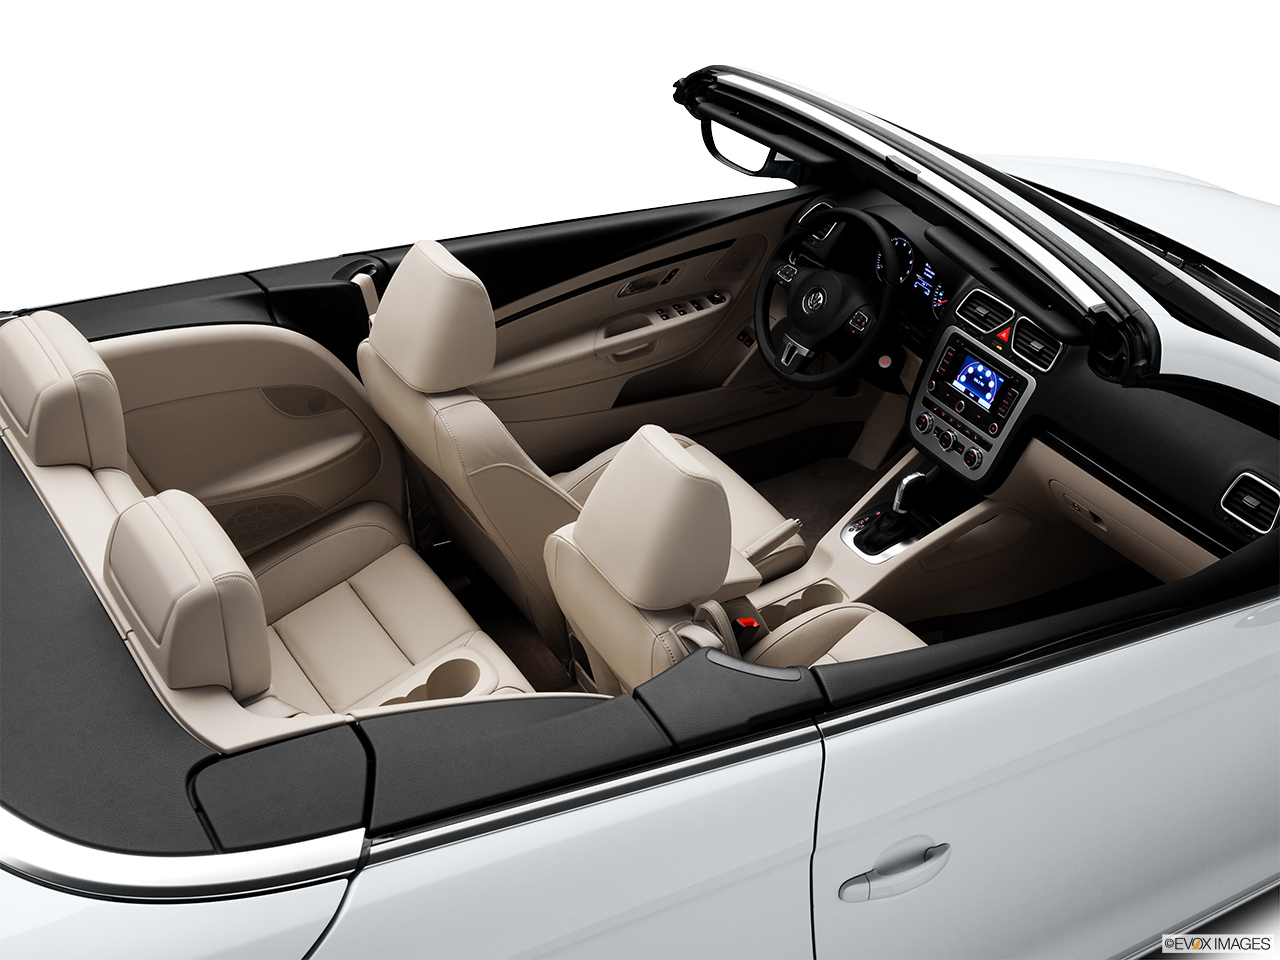 2013 Volkswagen Eos Lux Convertible Hero (high from passenger, looking down into interior). 